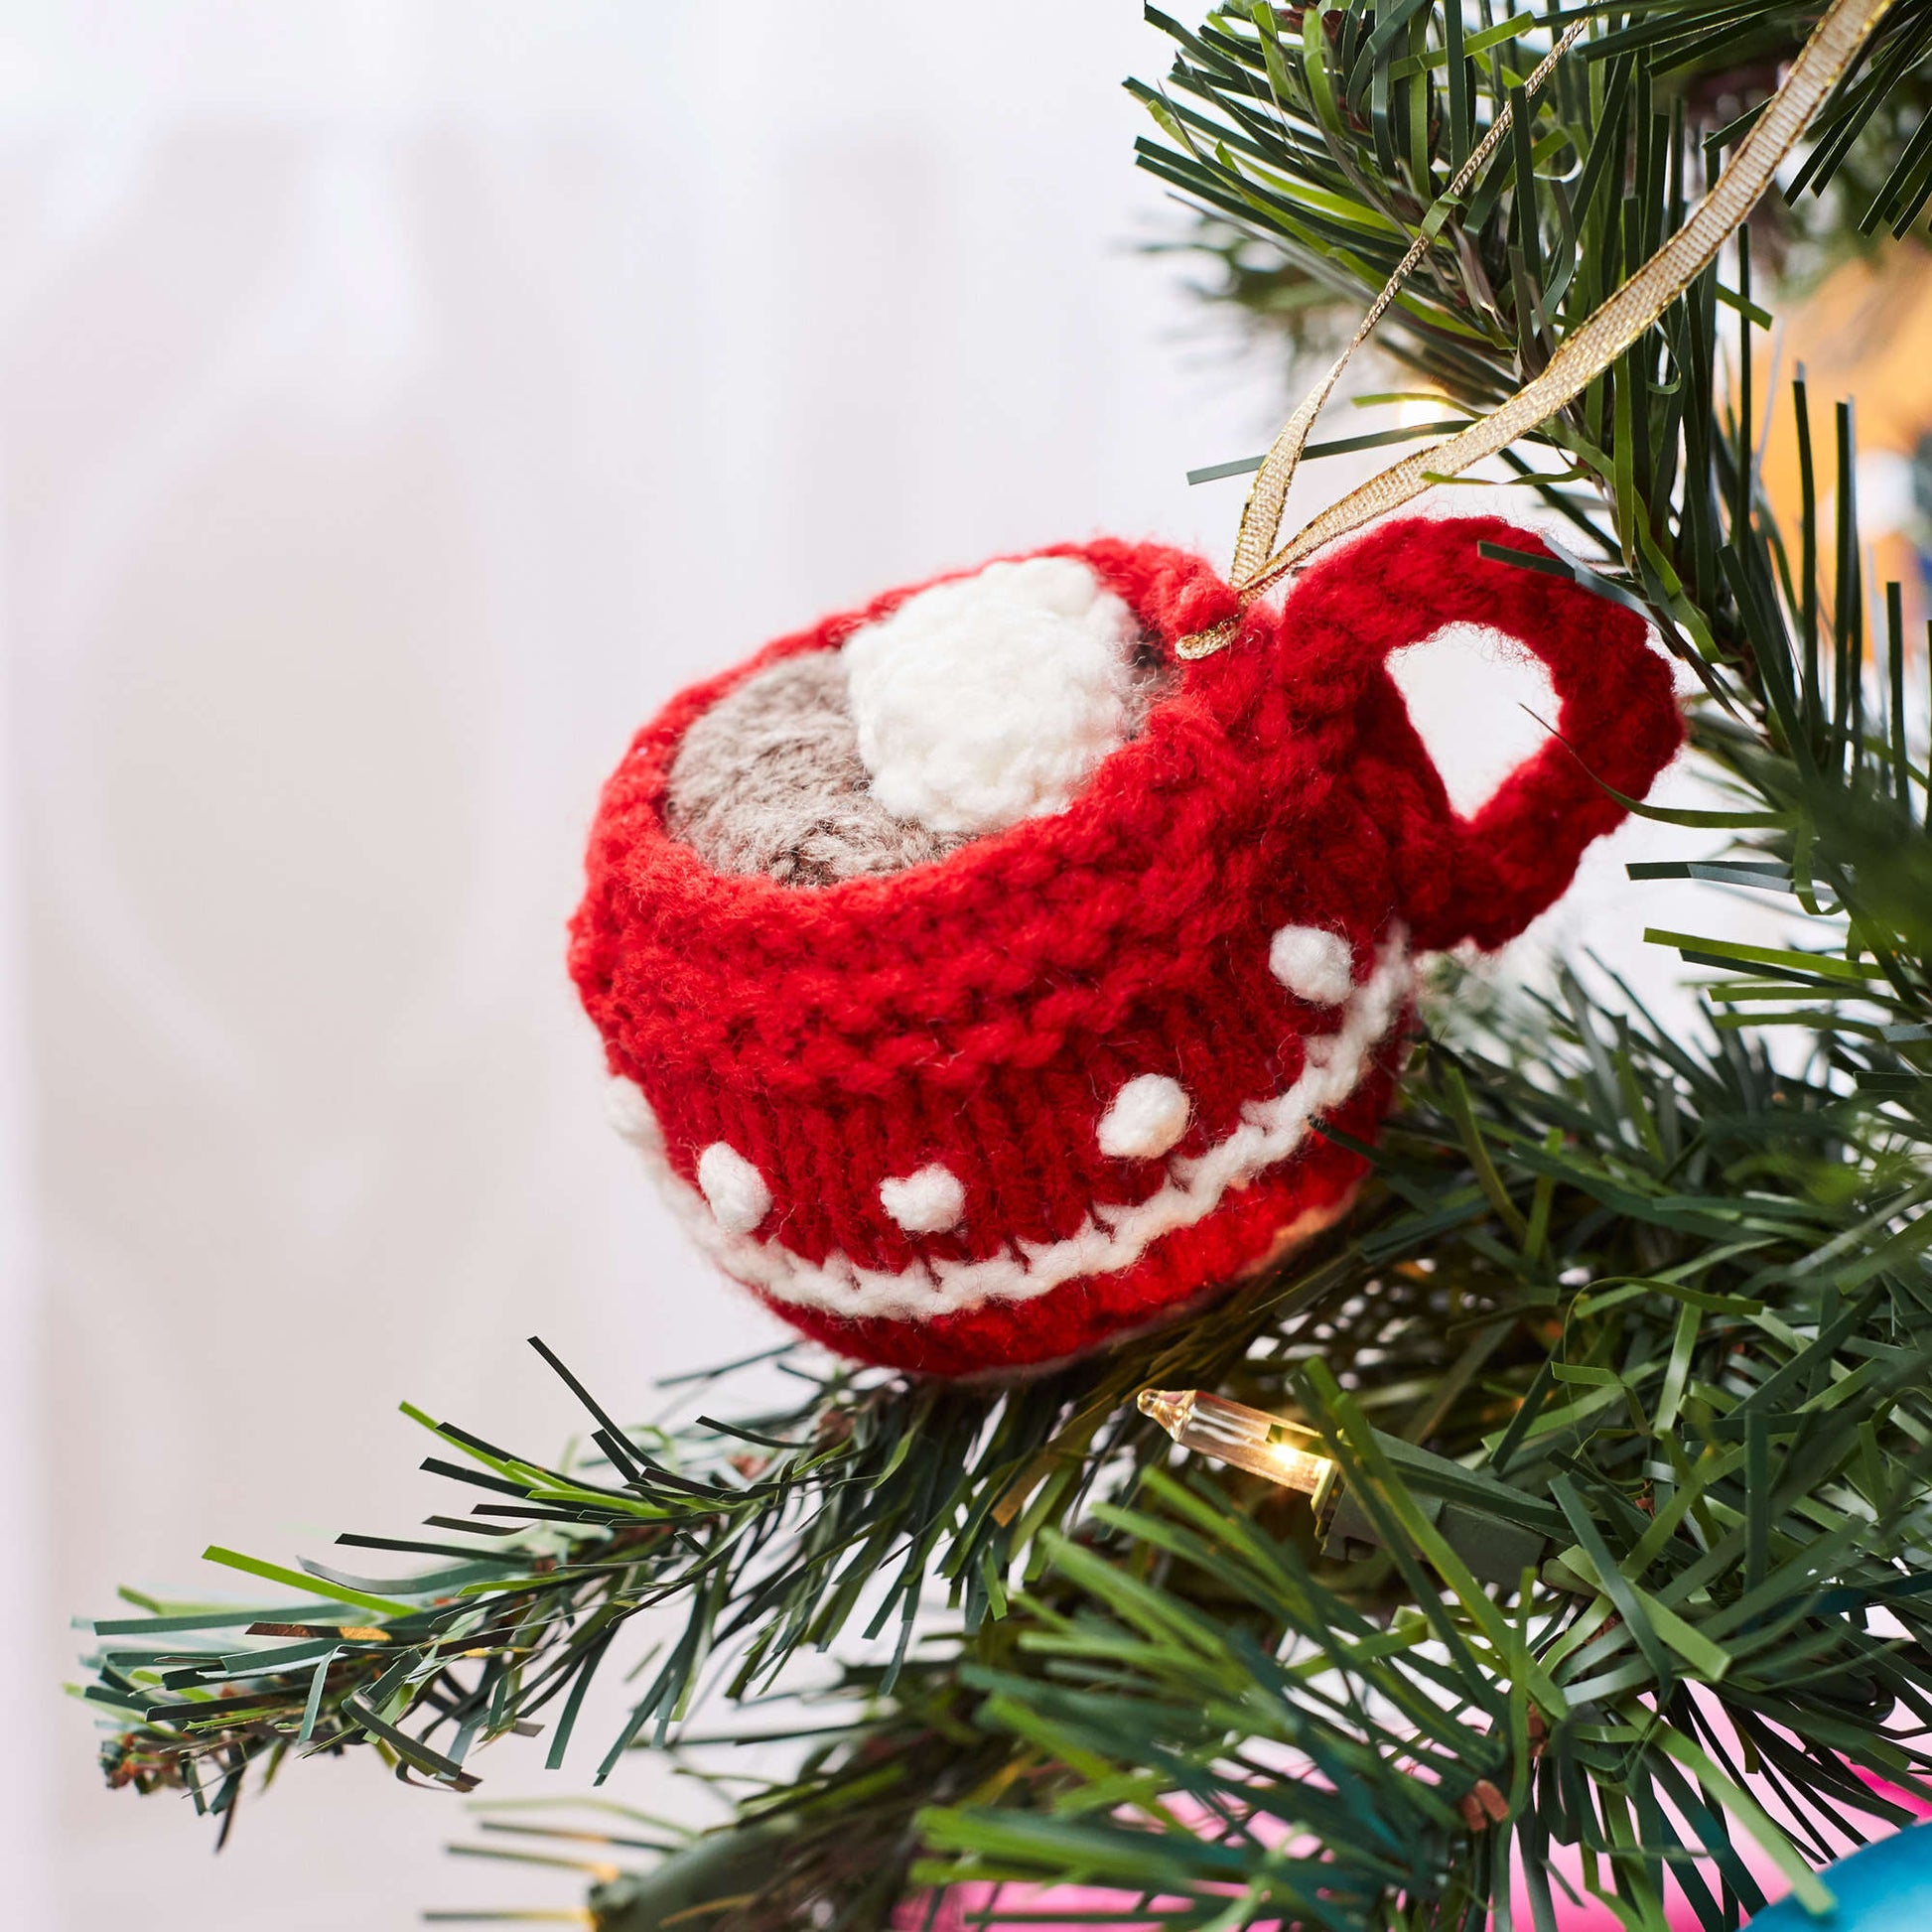 Free Red Heart Knit Cup Of Cocoa Ornament Pattern